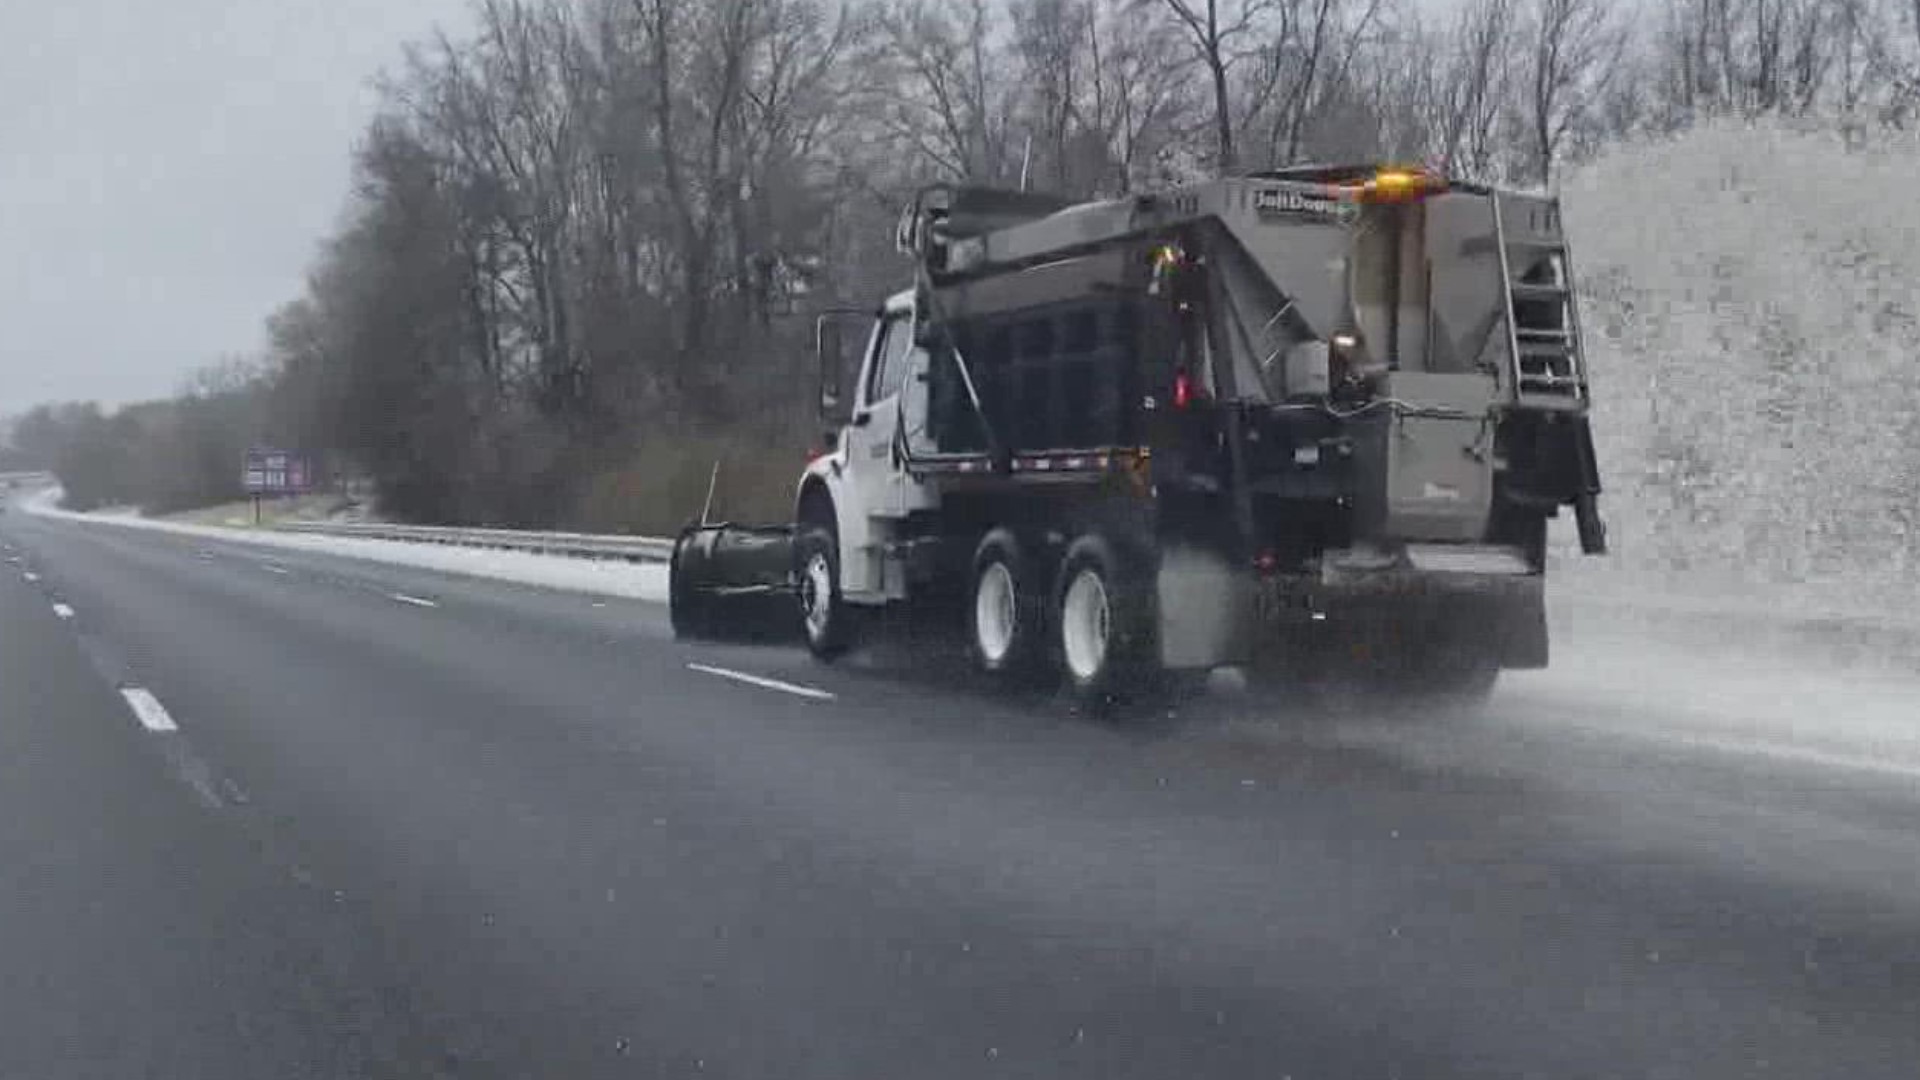 Crews hit the street near Fort Mill, South Carolina in York County to clear away ice and sleet from Sunday's winter storm.